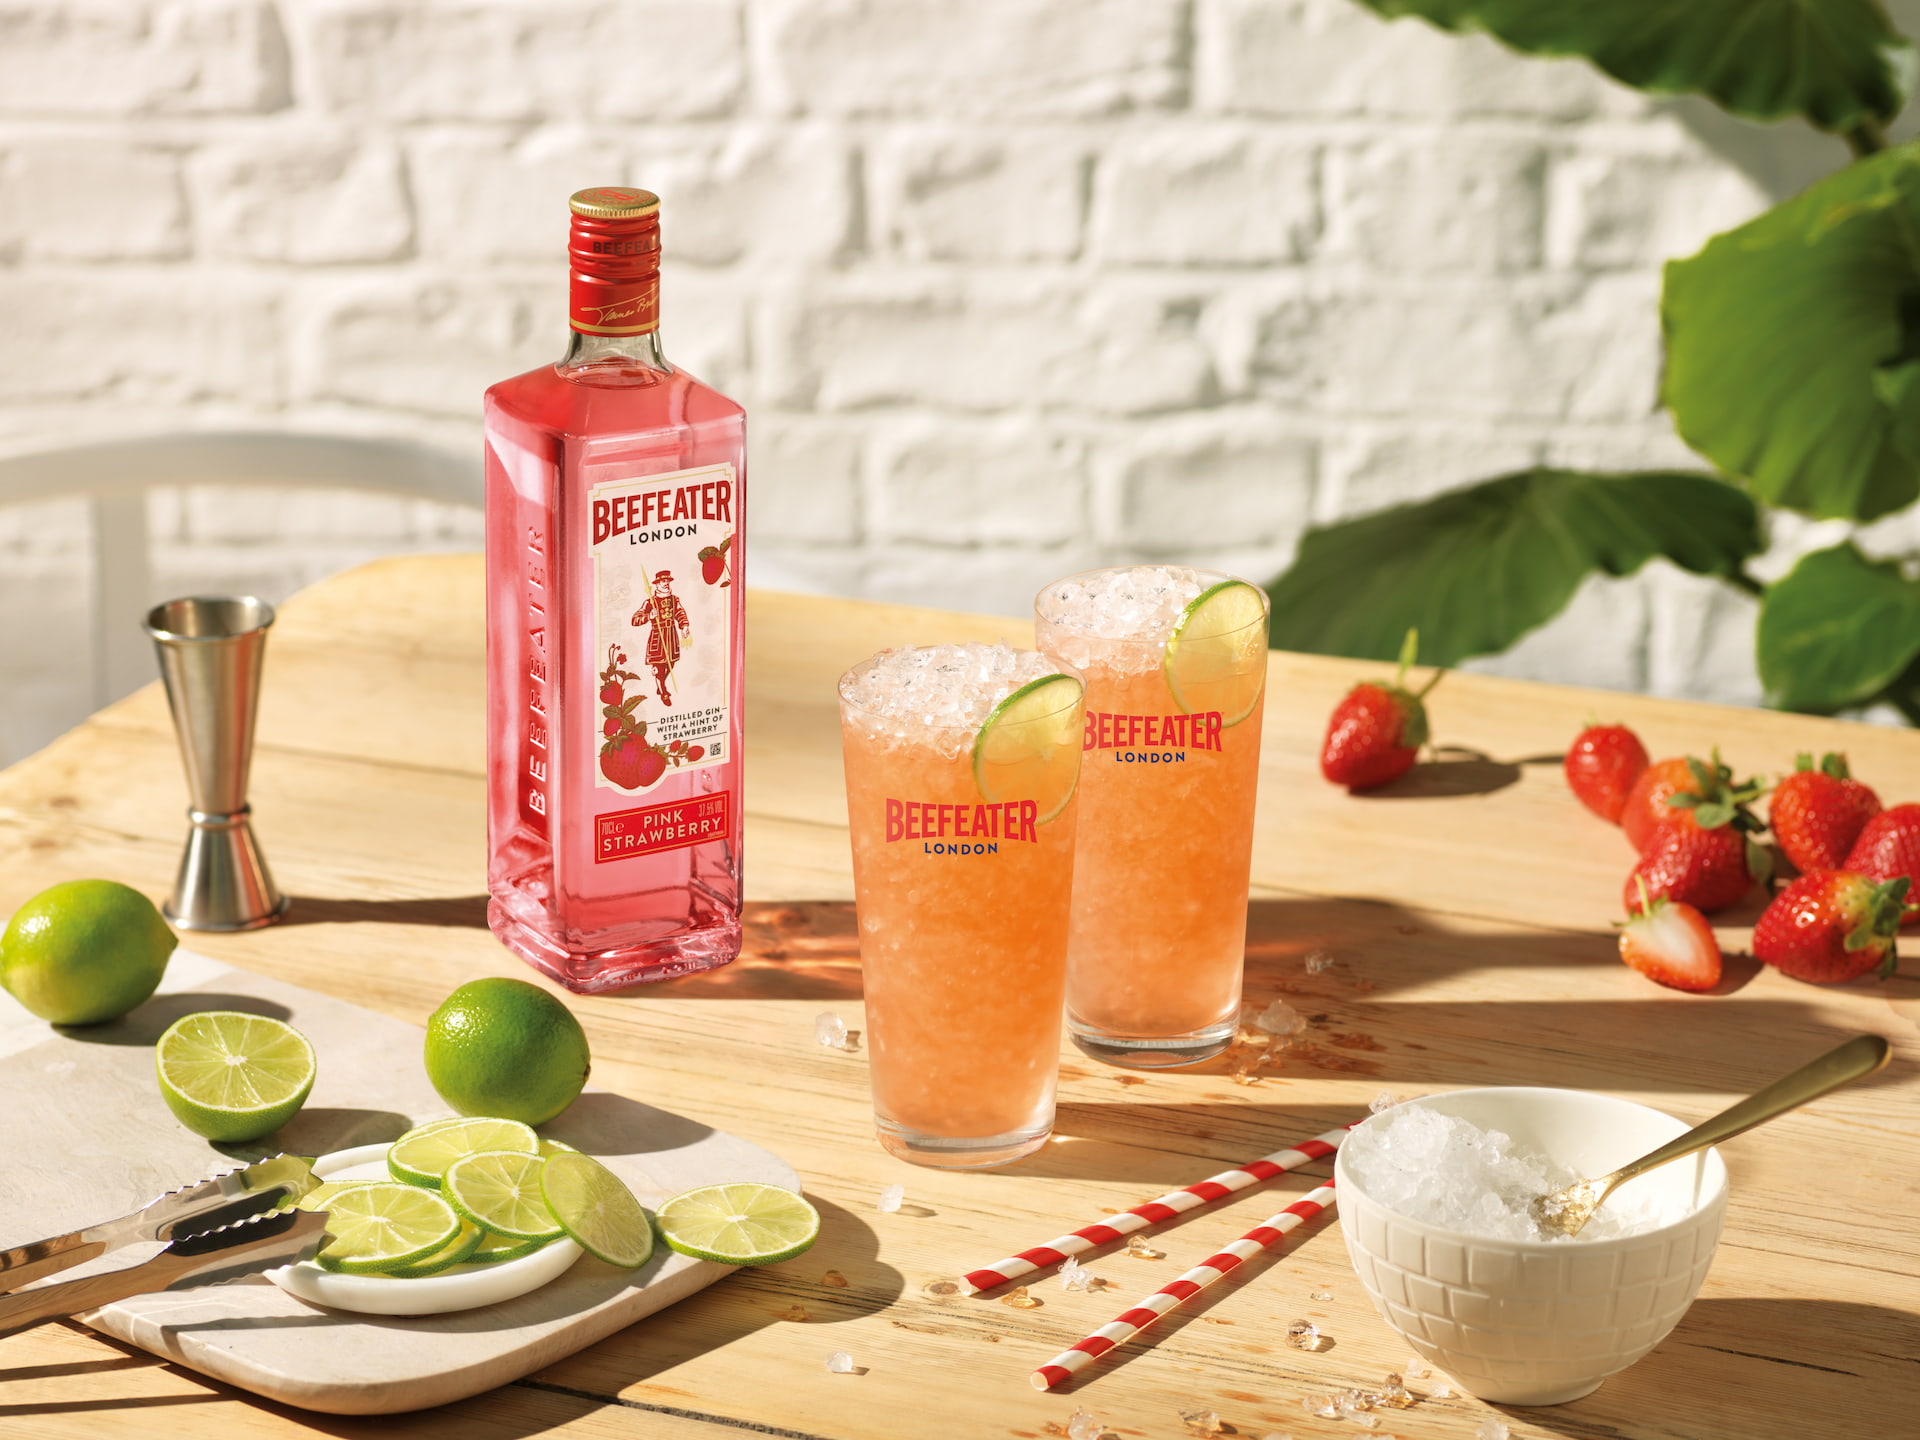 Pink Floradora - gin and ginger ale pink gin cocktail recipe - Beefeater Gin